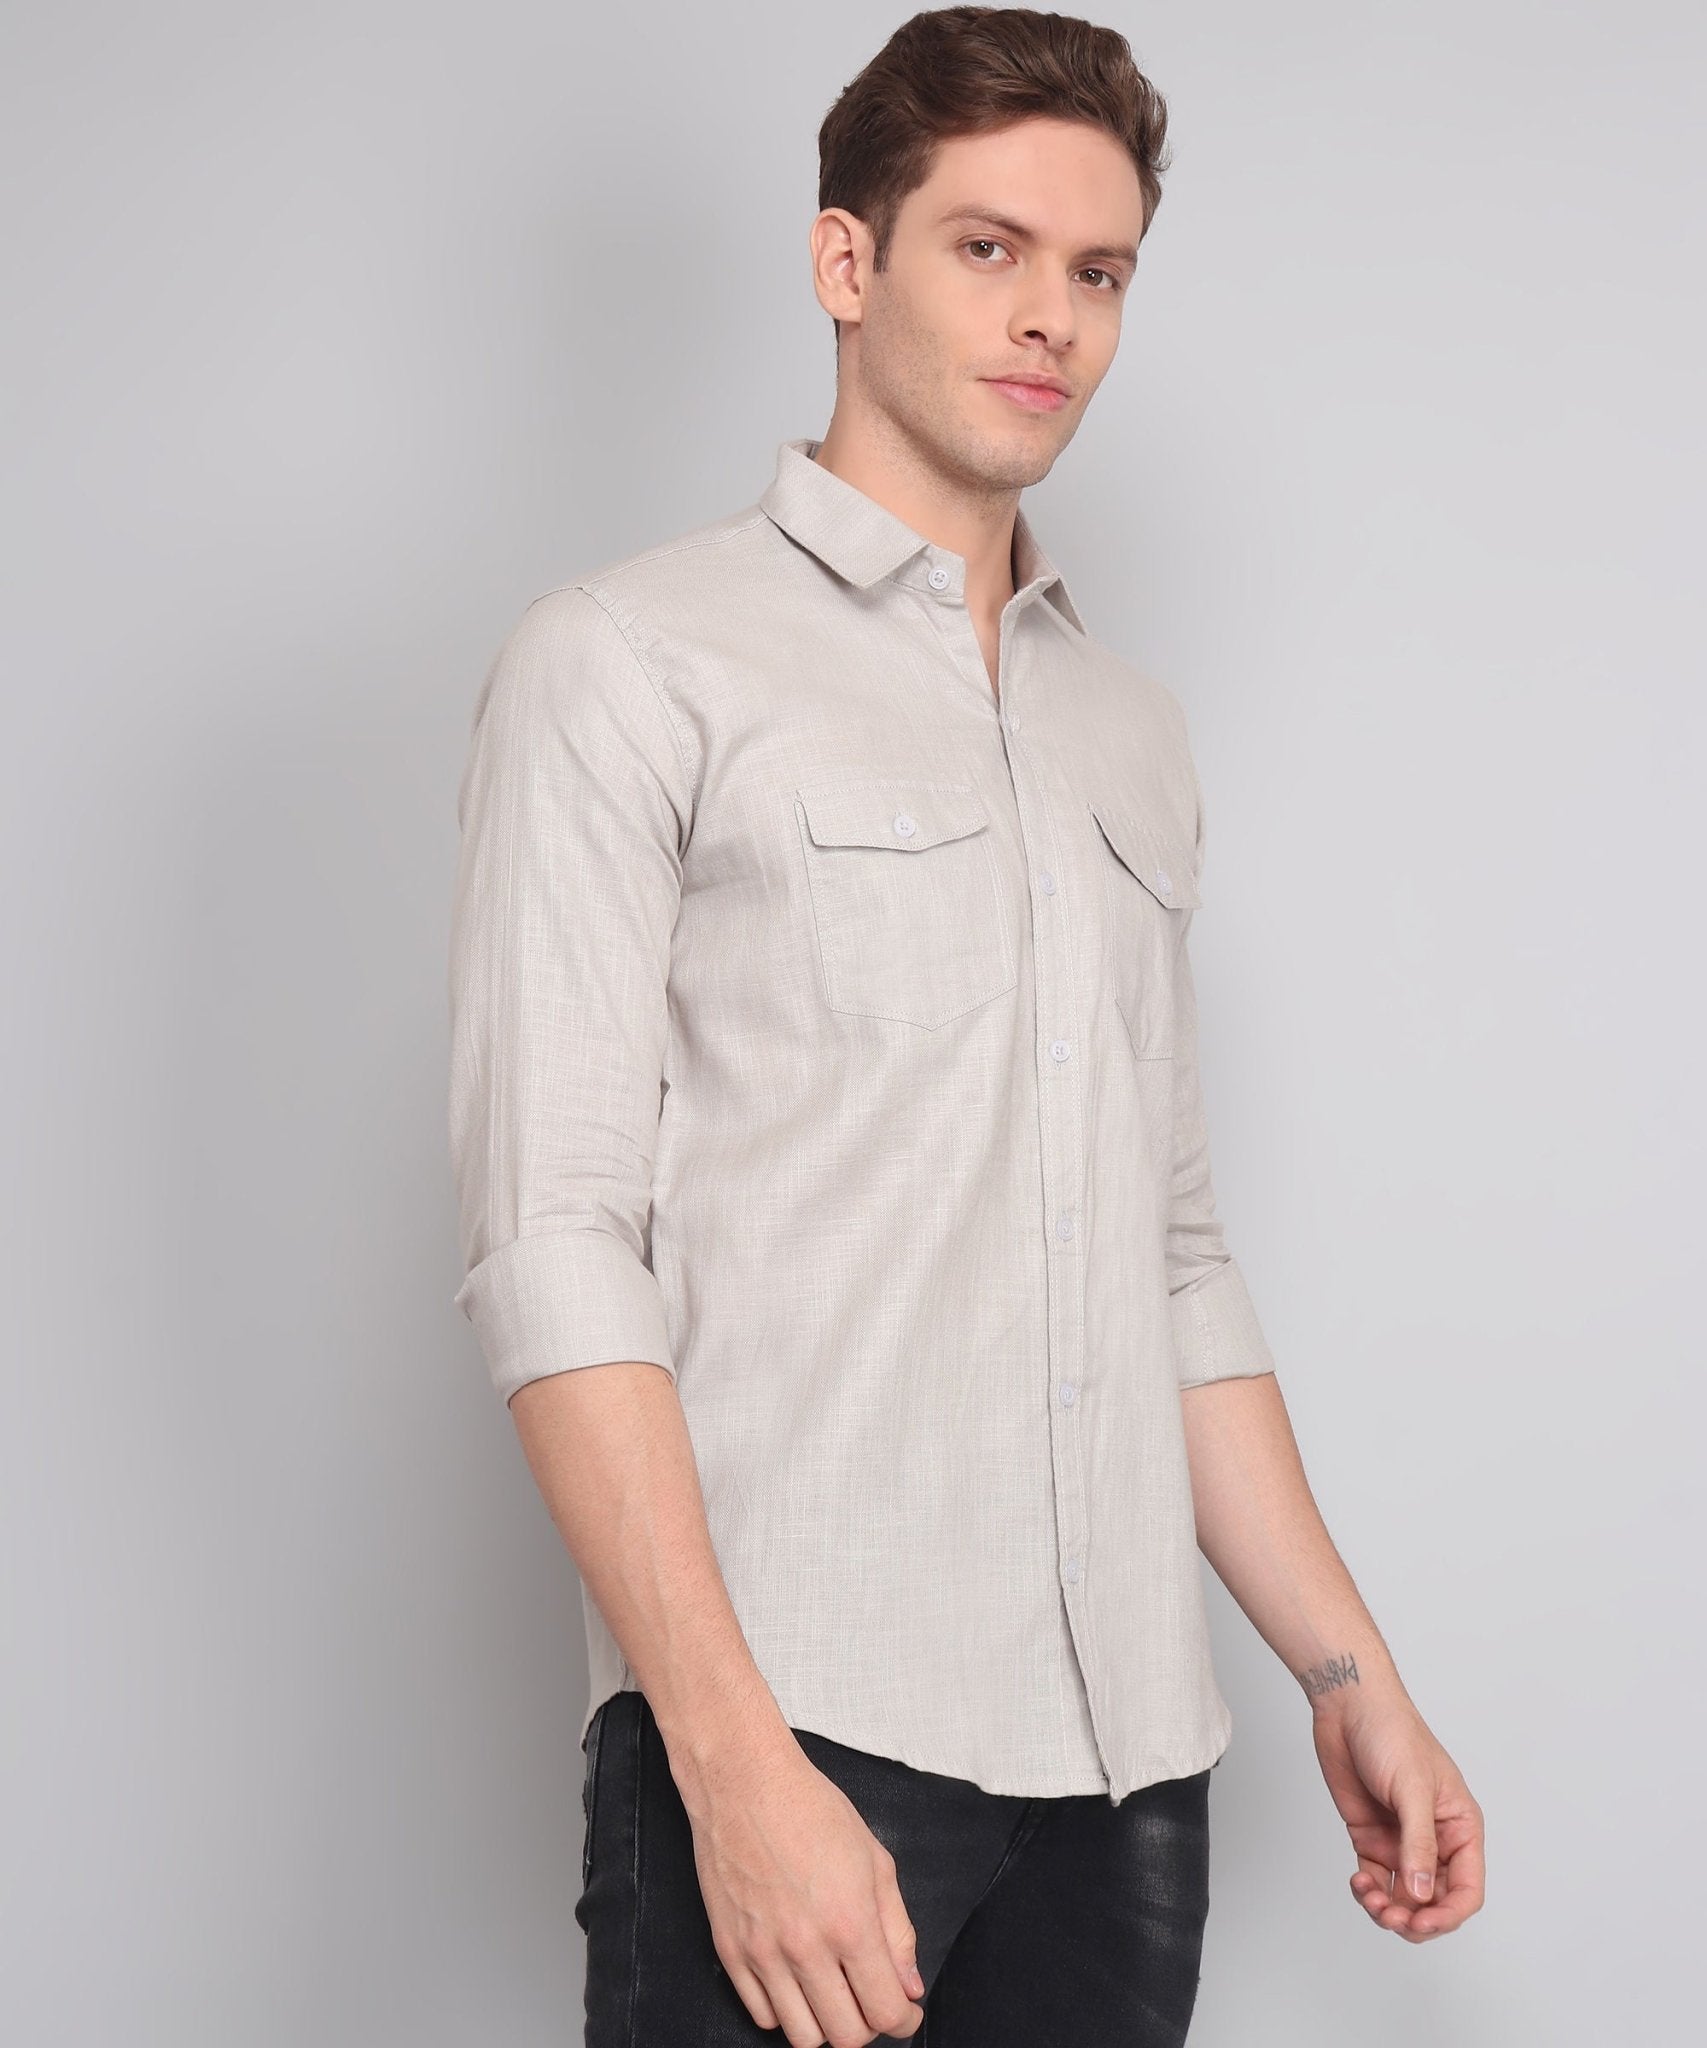 TryBuy Premium Grey Solid Cotton Linen Casual Double Pocket Shirt for Men - TryBuy® USA🇺🇸